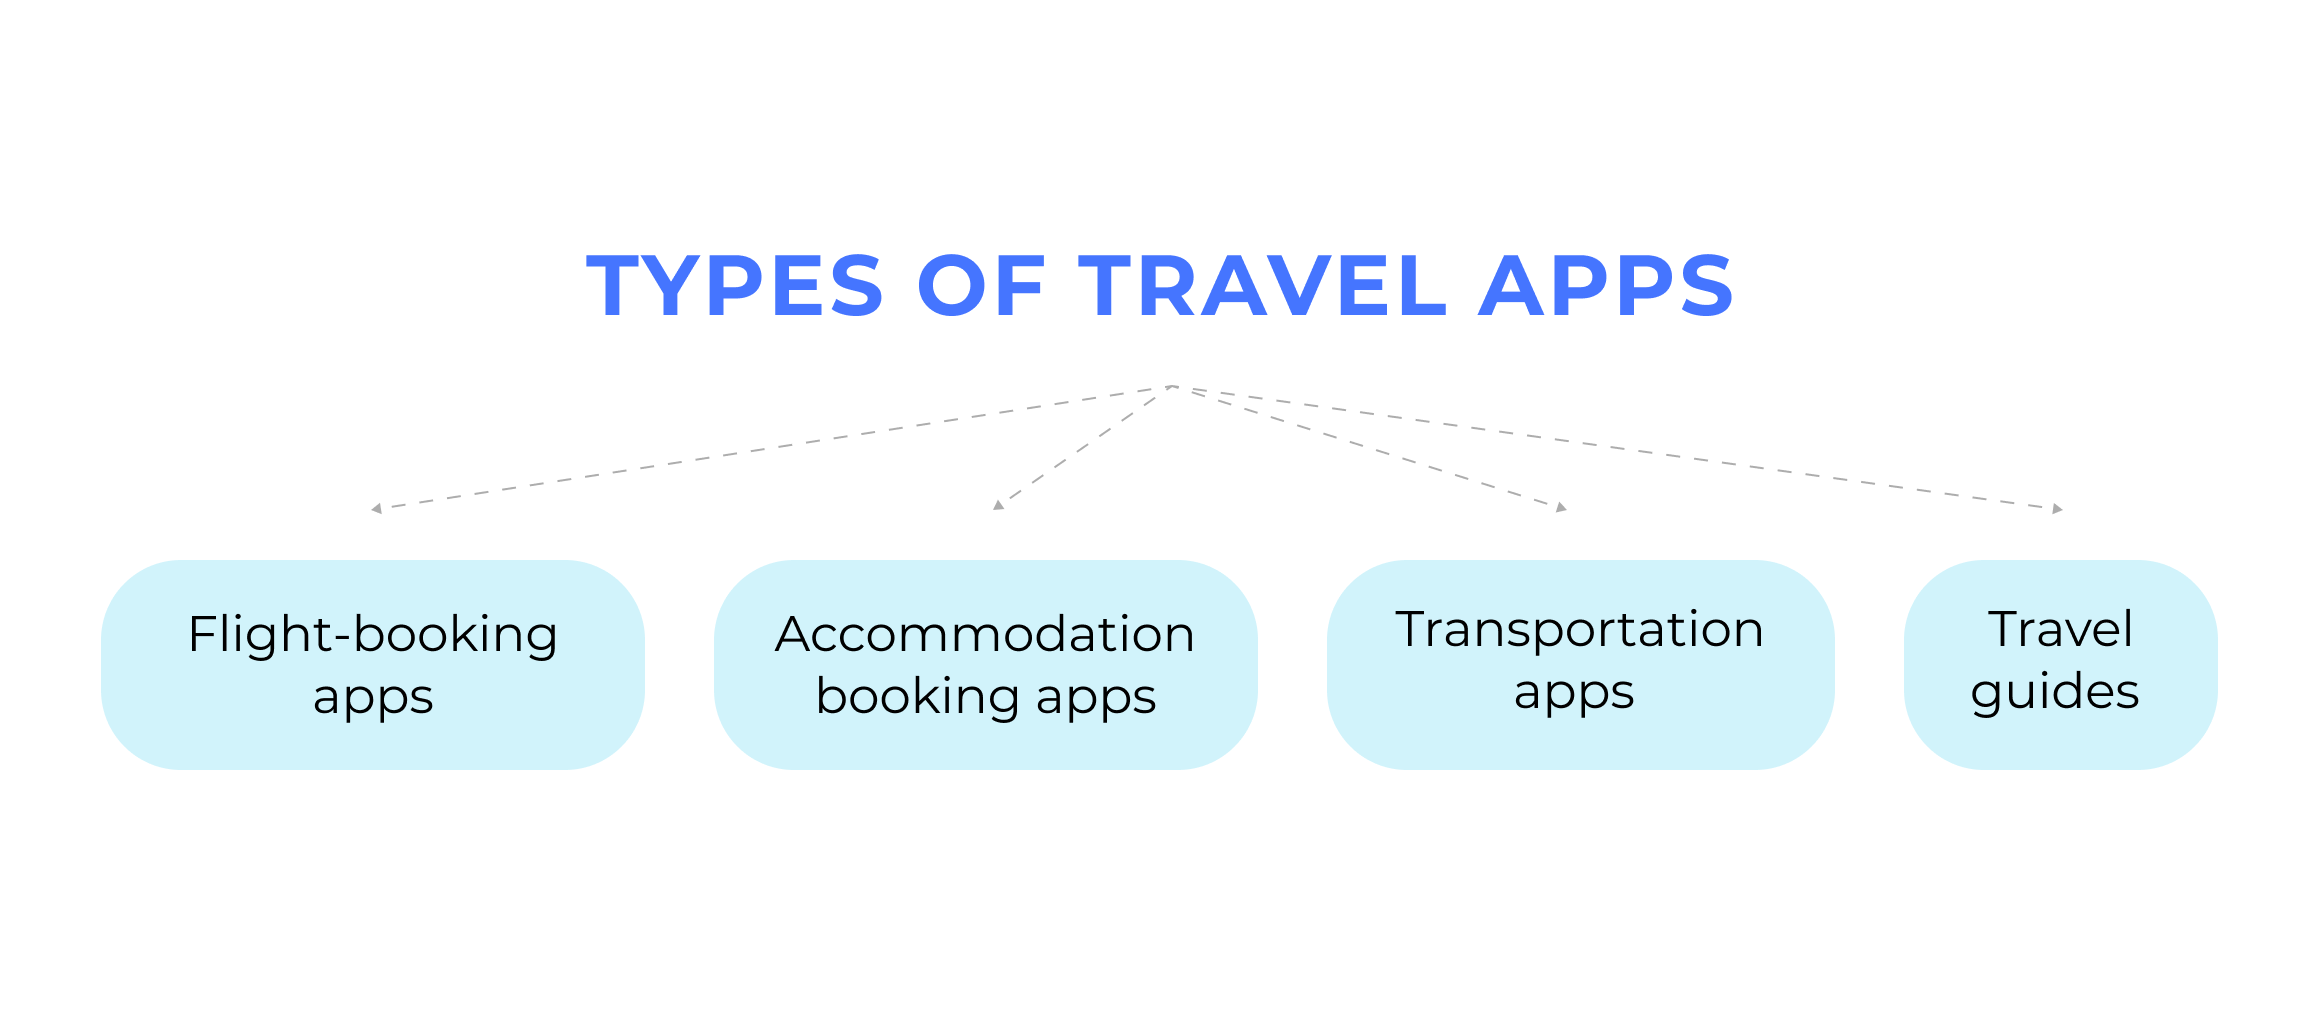 Types of travel apps 